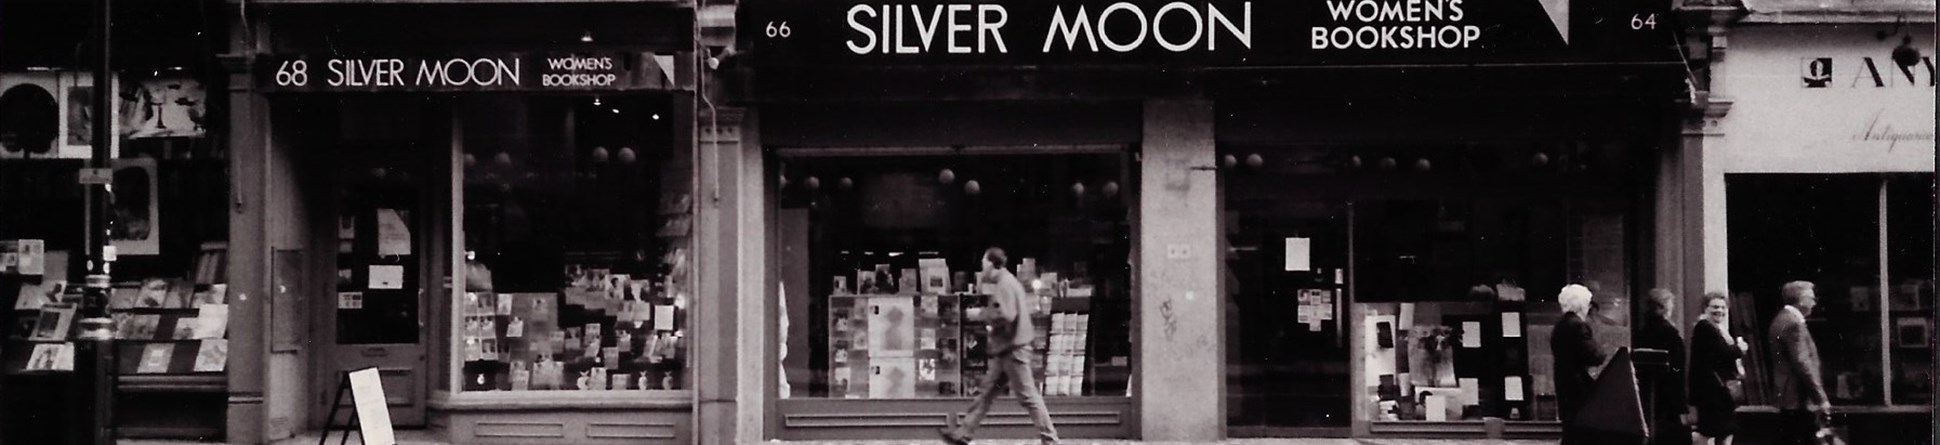 Black and white photo of the front of the Silver Moon Bookshop photographed from the street with pedestrians walking past.